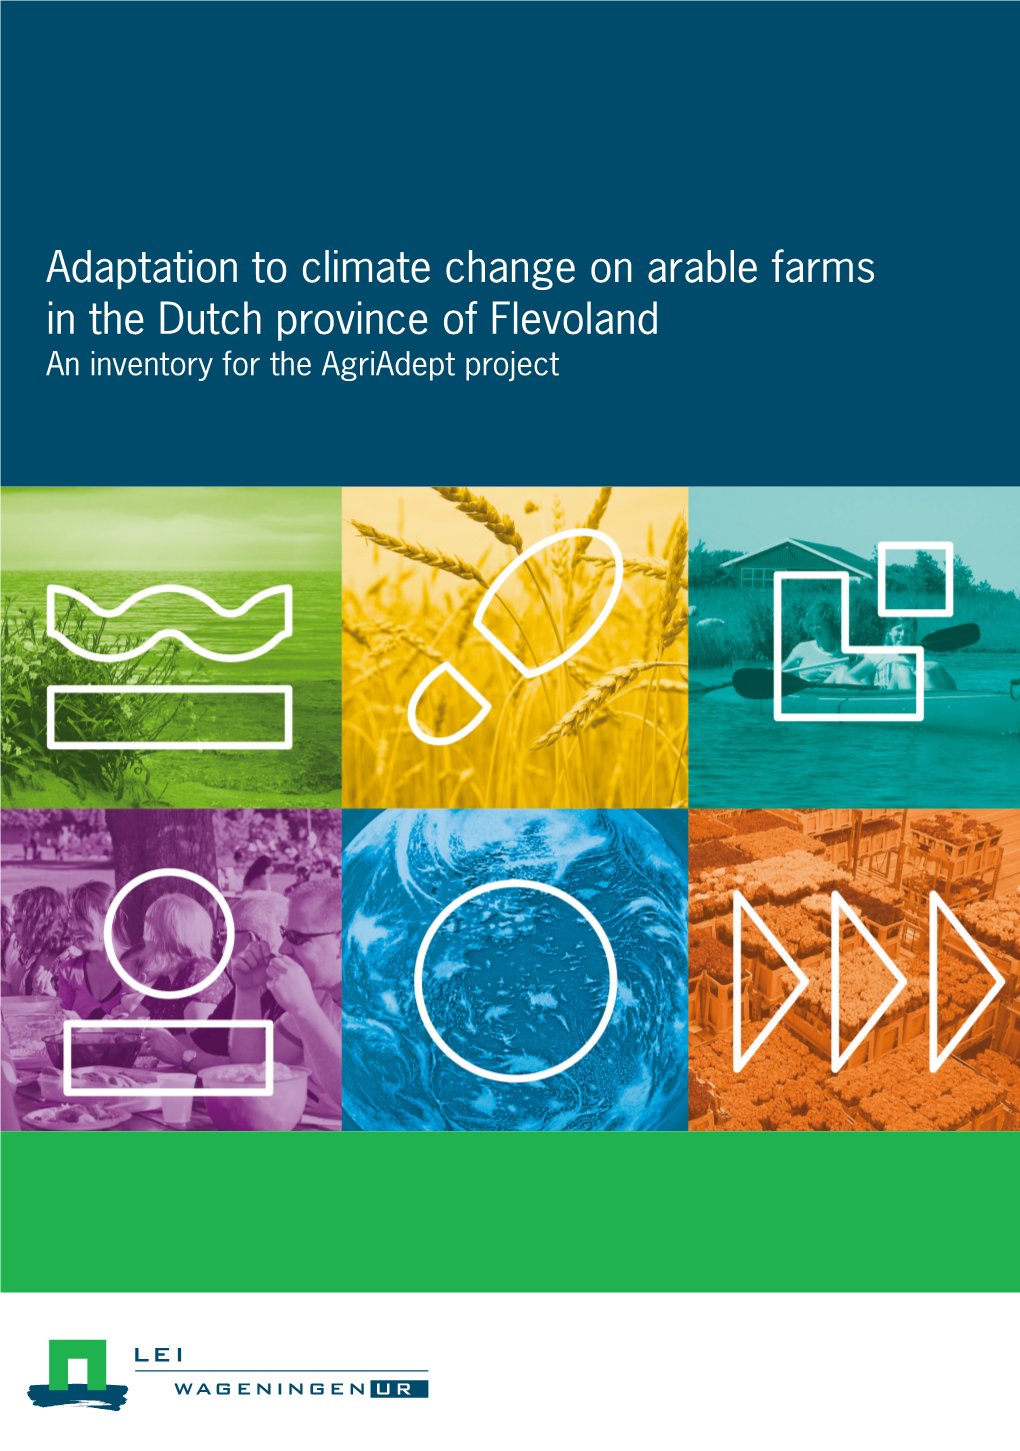 Adaptation to Climate Change on Arable Farms in the Dutch Province of Flevoland an Inventory for the Agriadapt Project